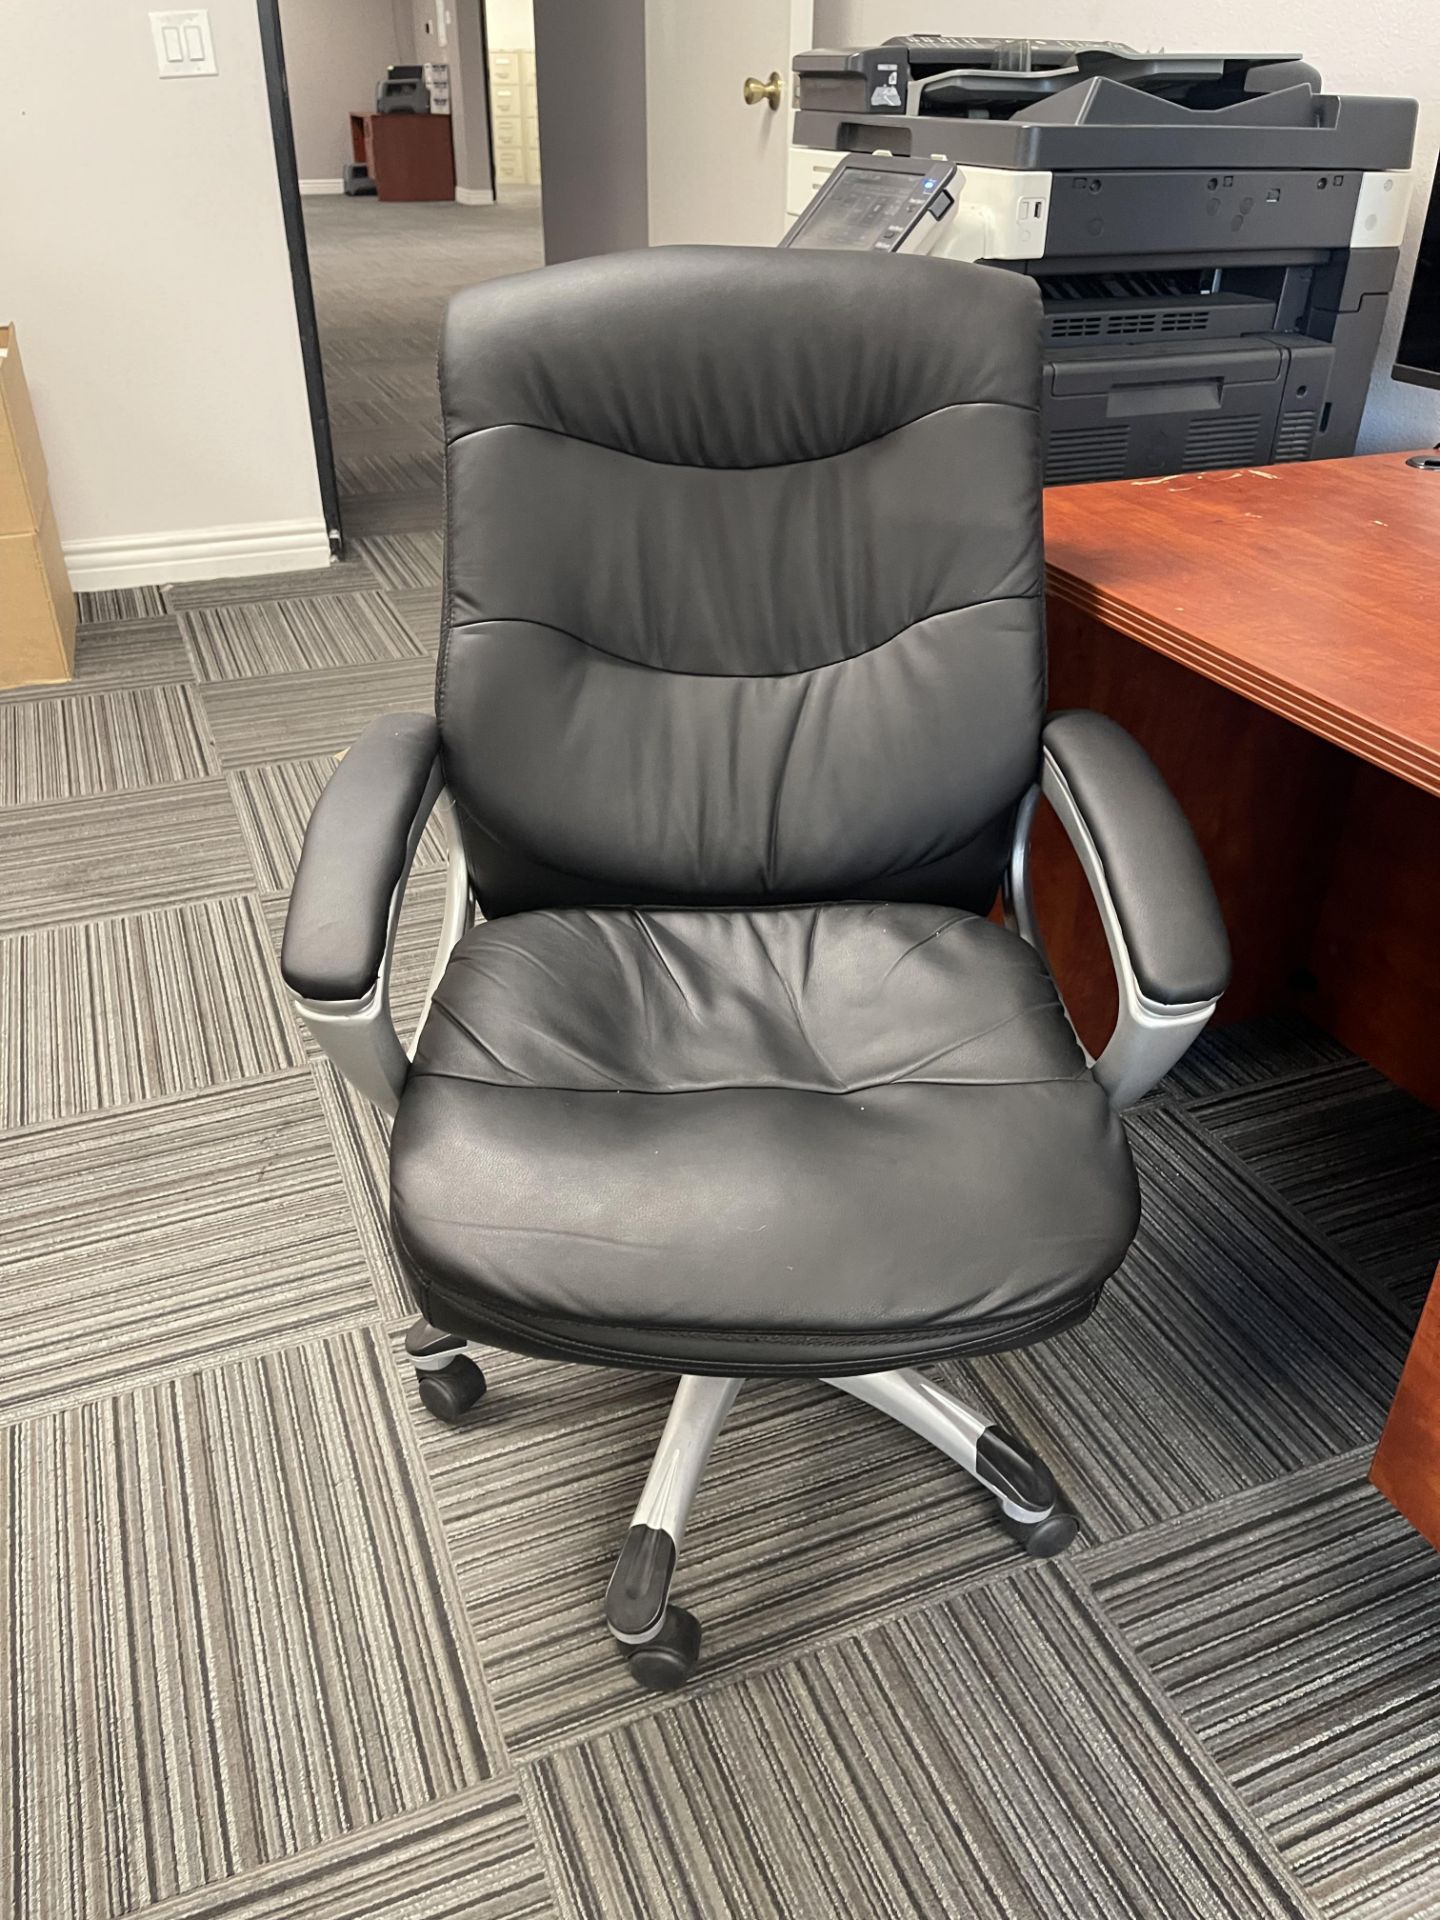 OFFICE CHAIR - Image 2 of 2